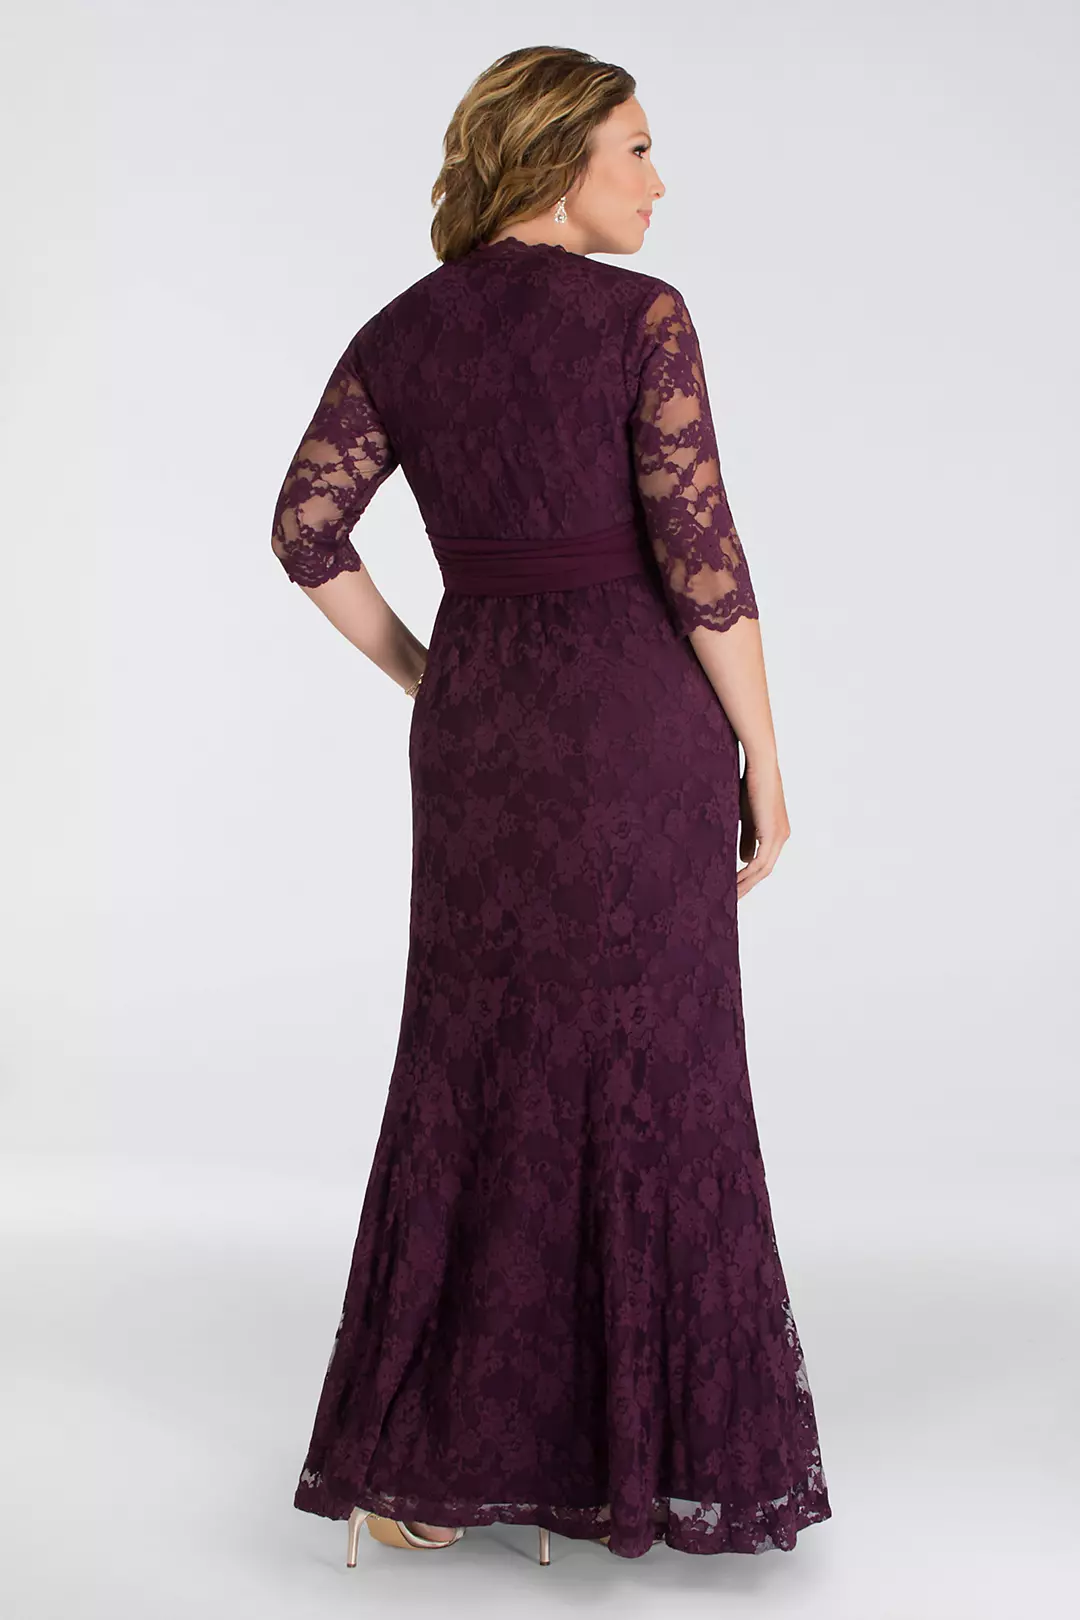 Screen Siren Lace Evening Gown